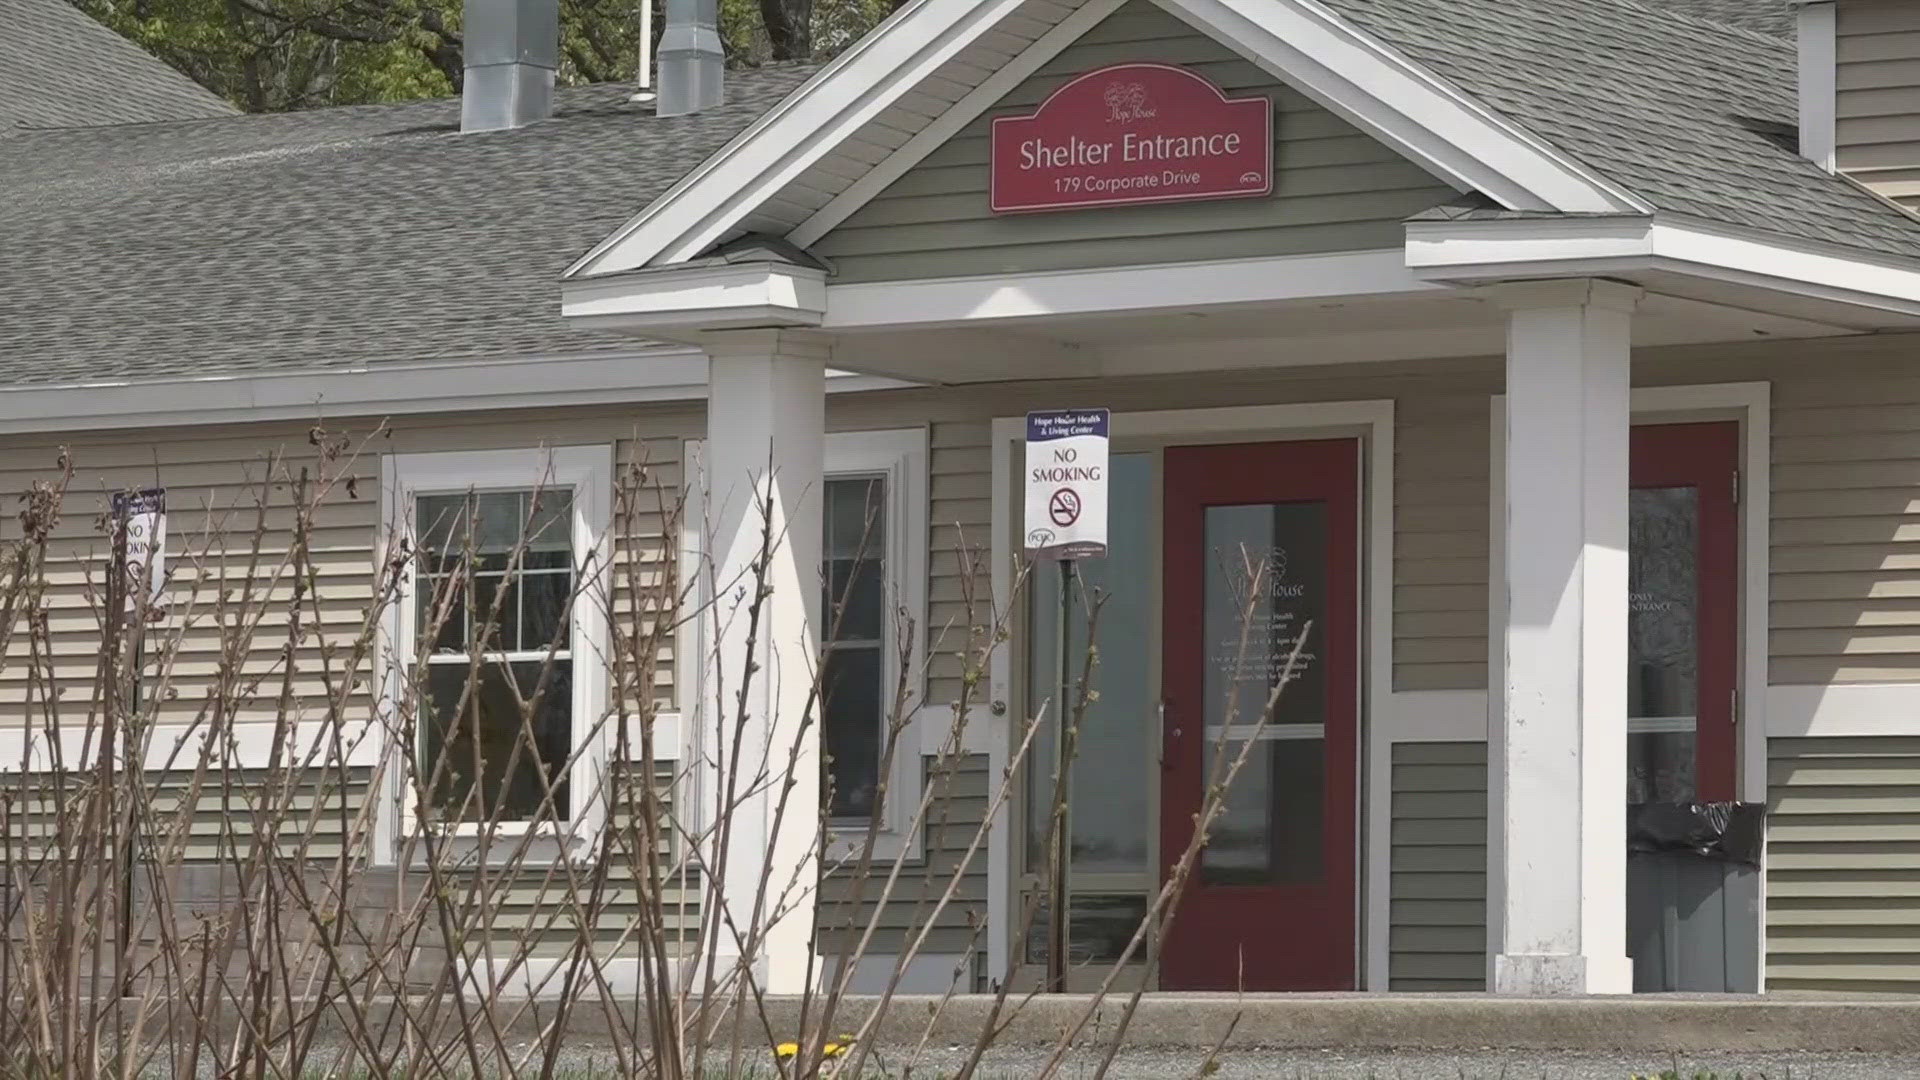 Representatives from Penobscot Community Health Care said receiving the state funding makes them hopeful but there is still more ground to cover.